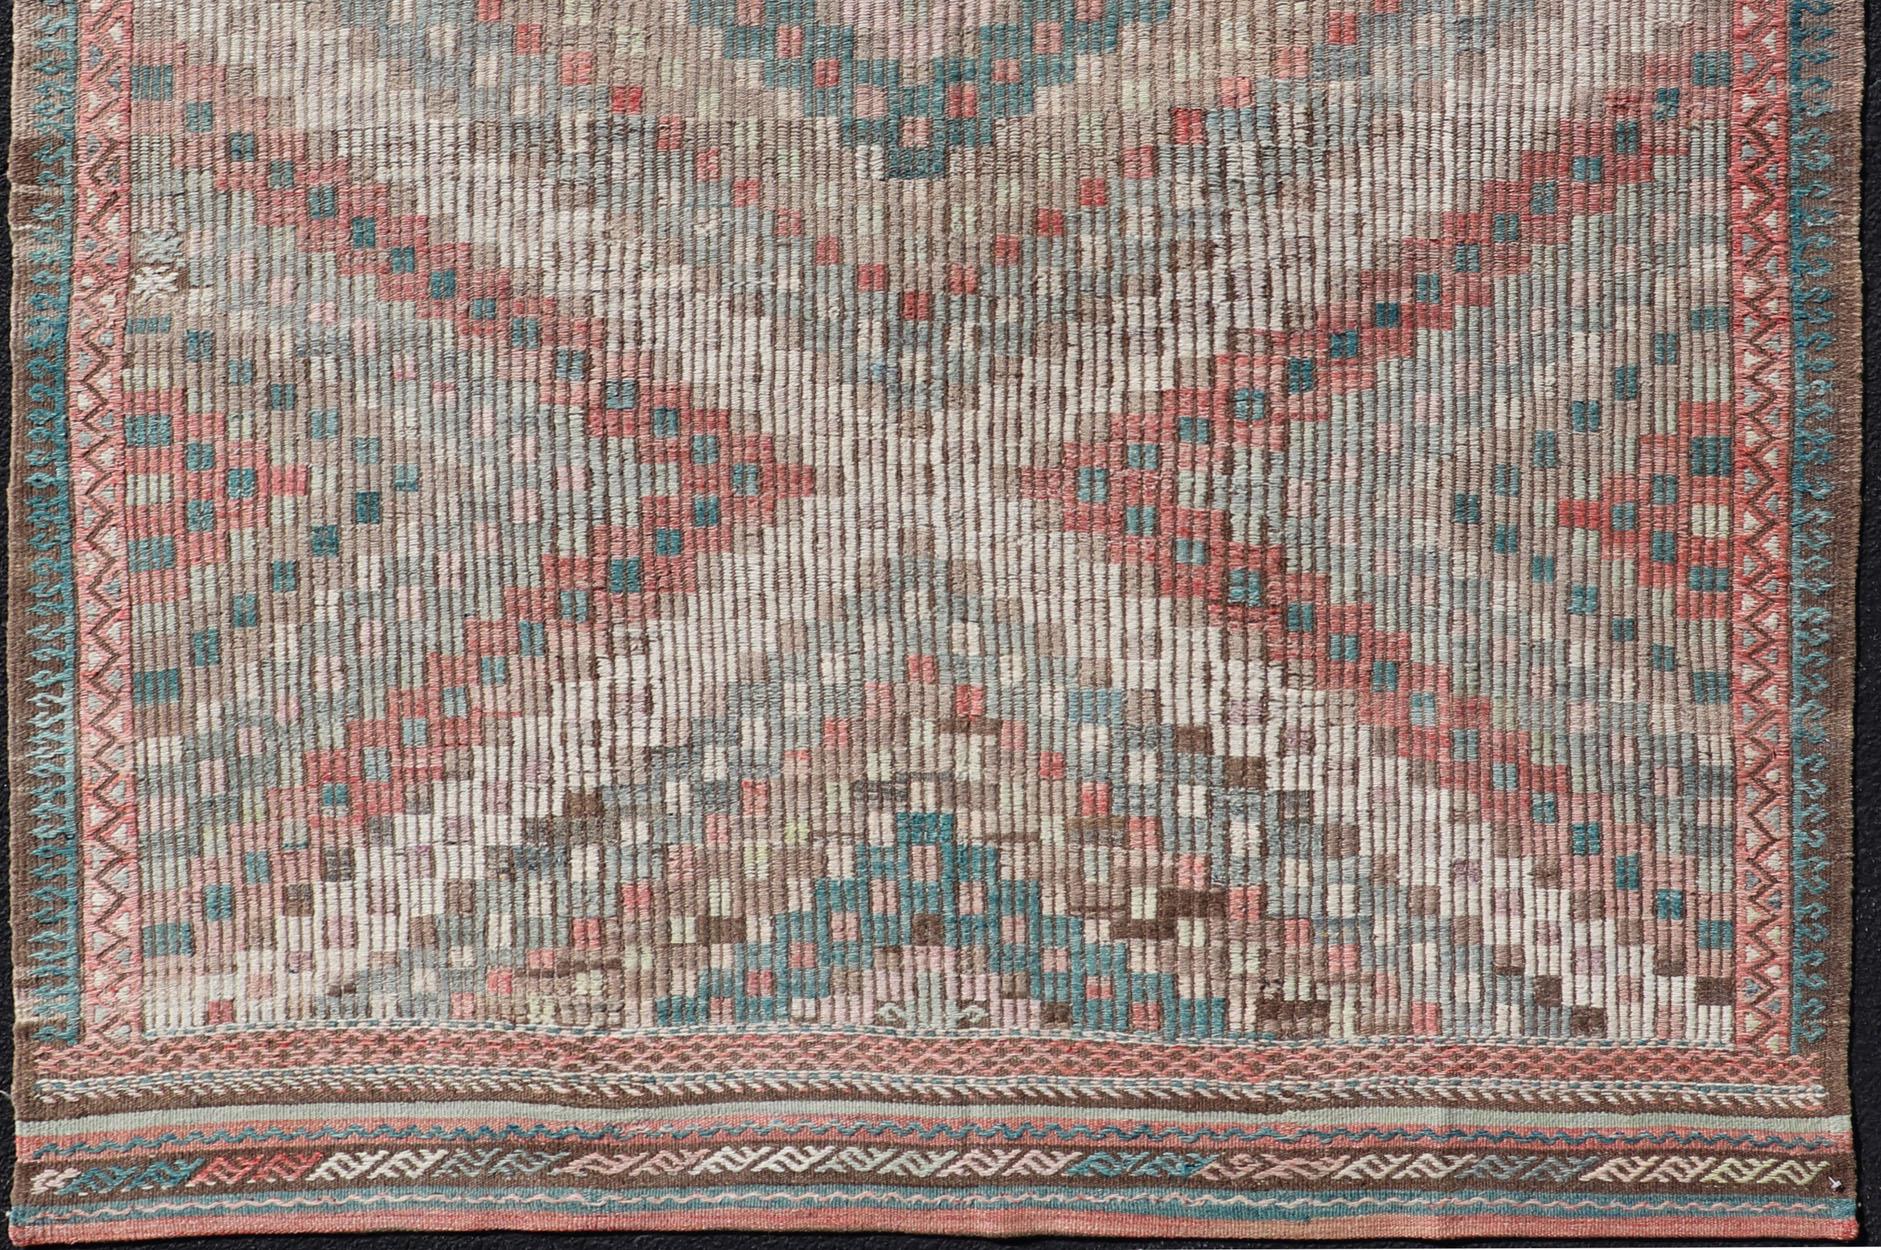 Teal blue, brick red, pink, salmon, teal green, cream, soft buttery yellow and light green populates throughout this beautiful vintage embroidered Kilim rug from Turkey, rug EN-2395, country of origin / type: Turkey / Kilim, circa 1940

Featuring